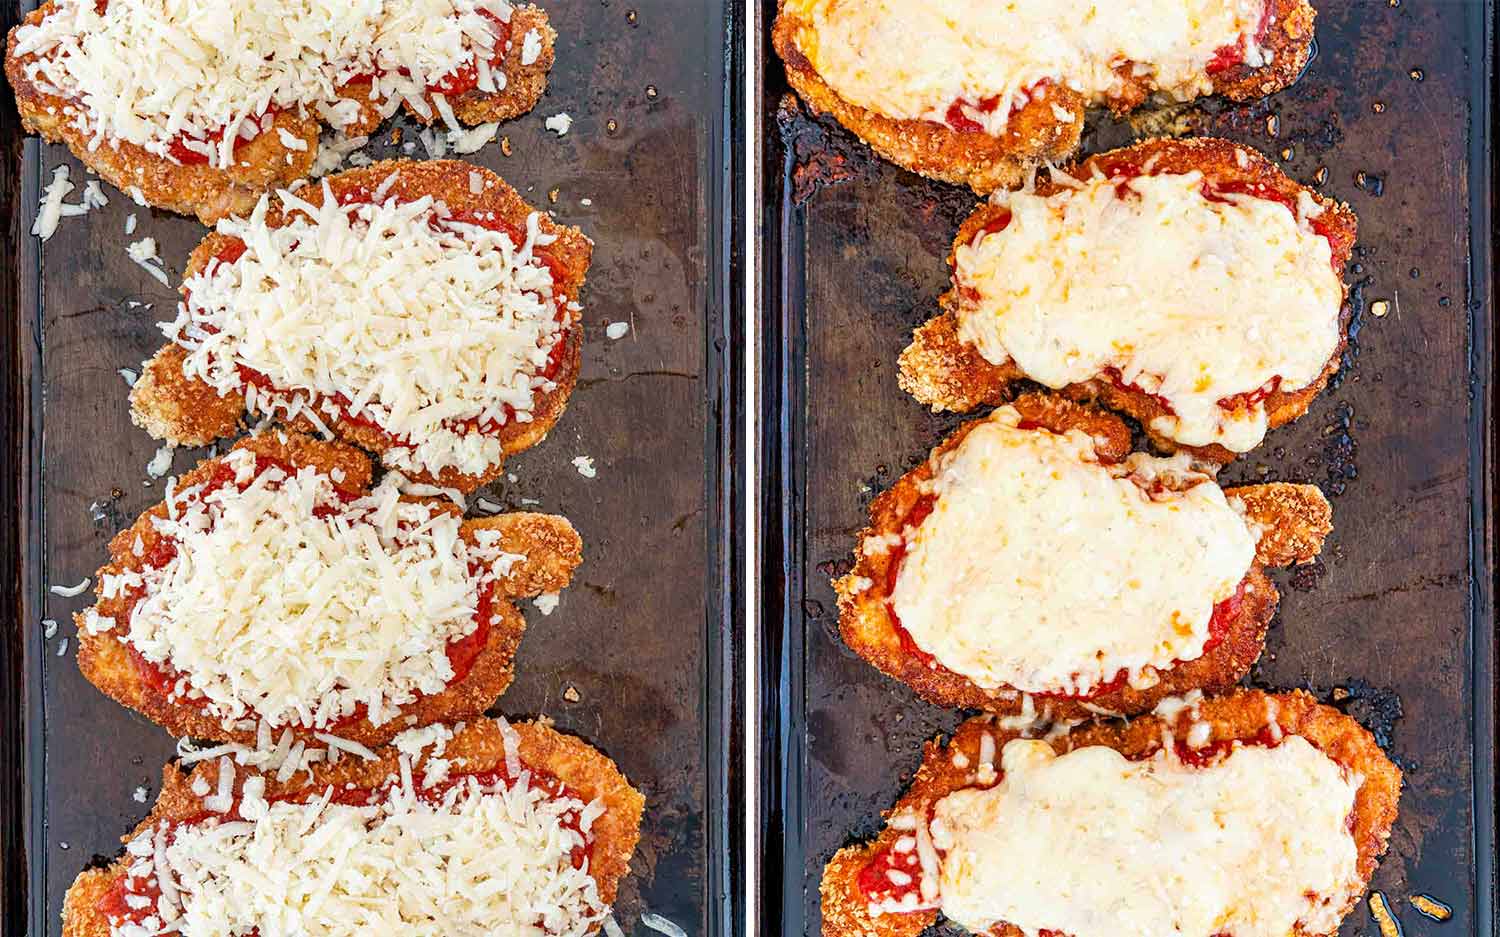 process shots showing how to make chicken parmesan.